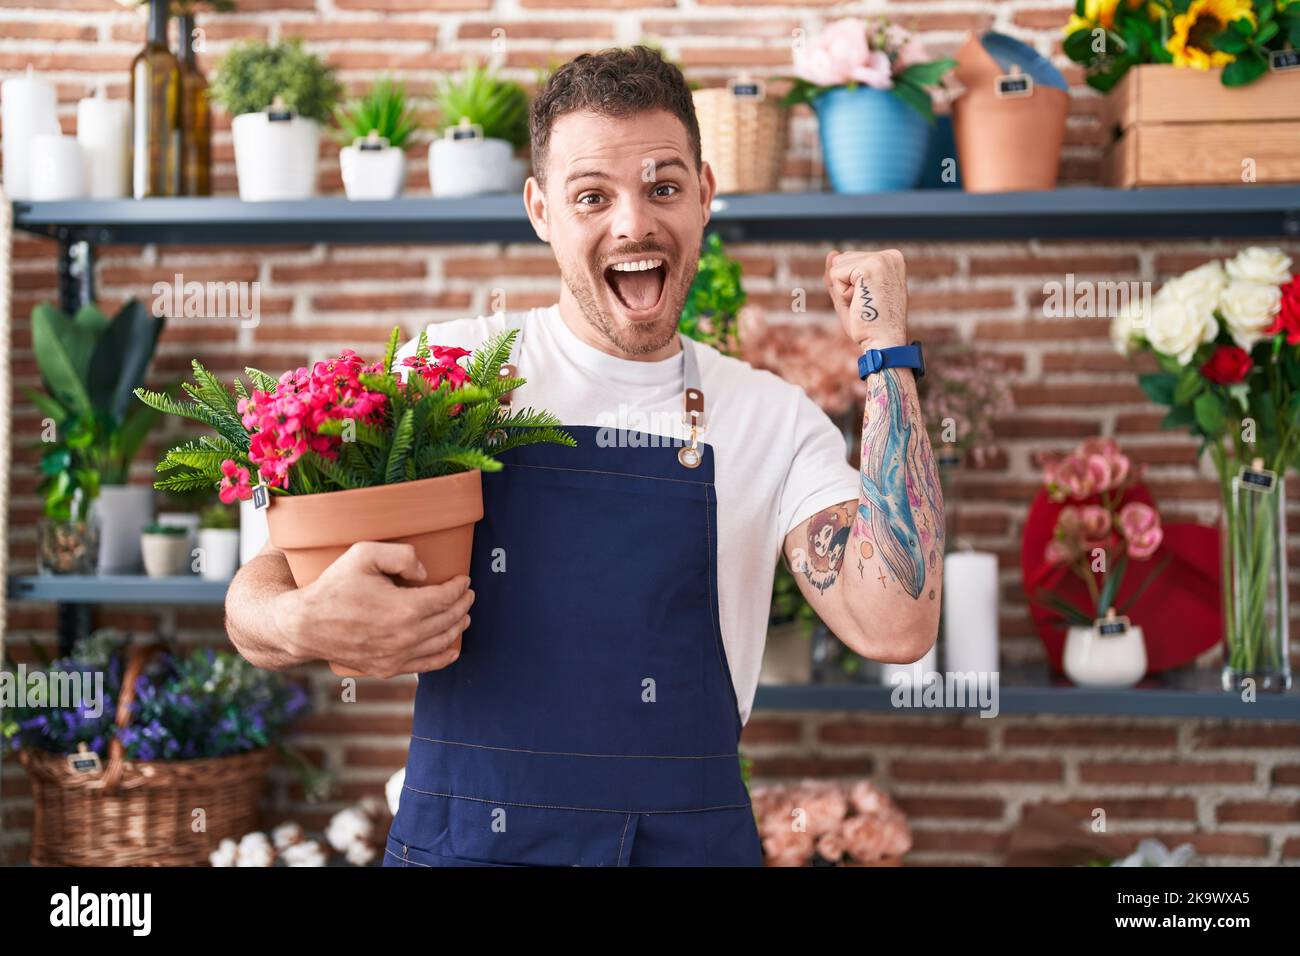 Young hispanic man working at florist shop holding plant pot screaming proud, celebrating victory and success very excited with raised arm Stock Photo